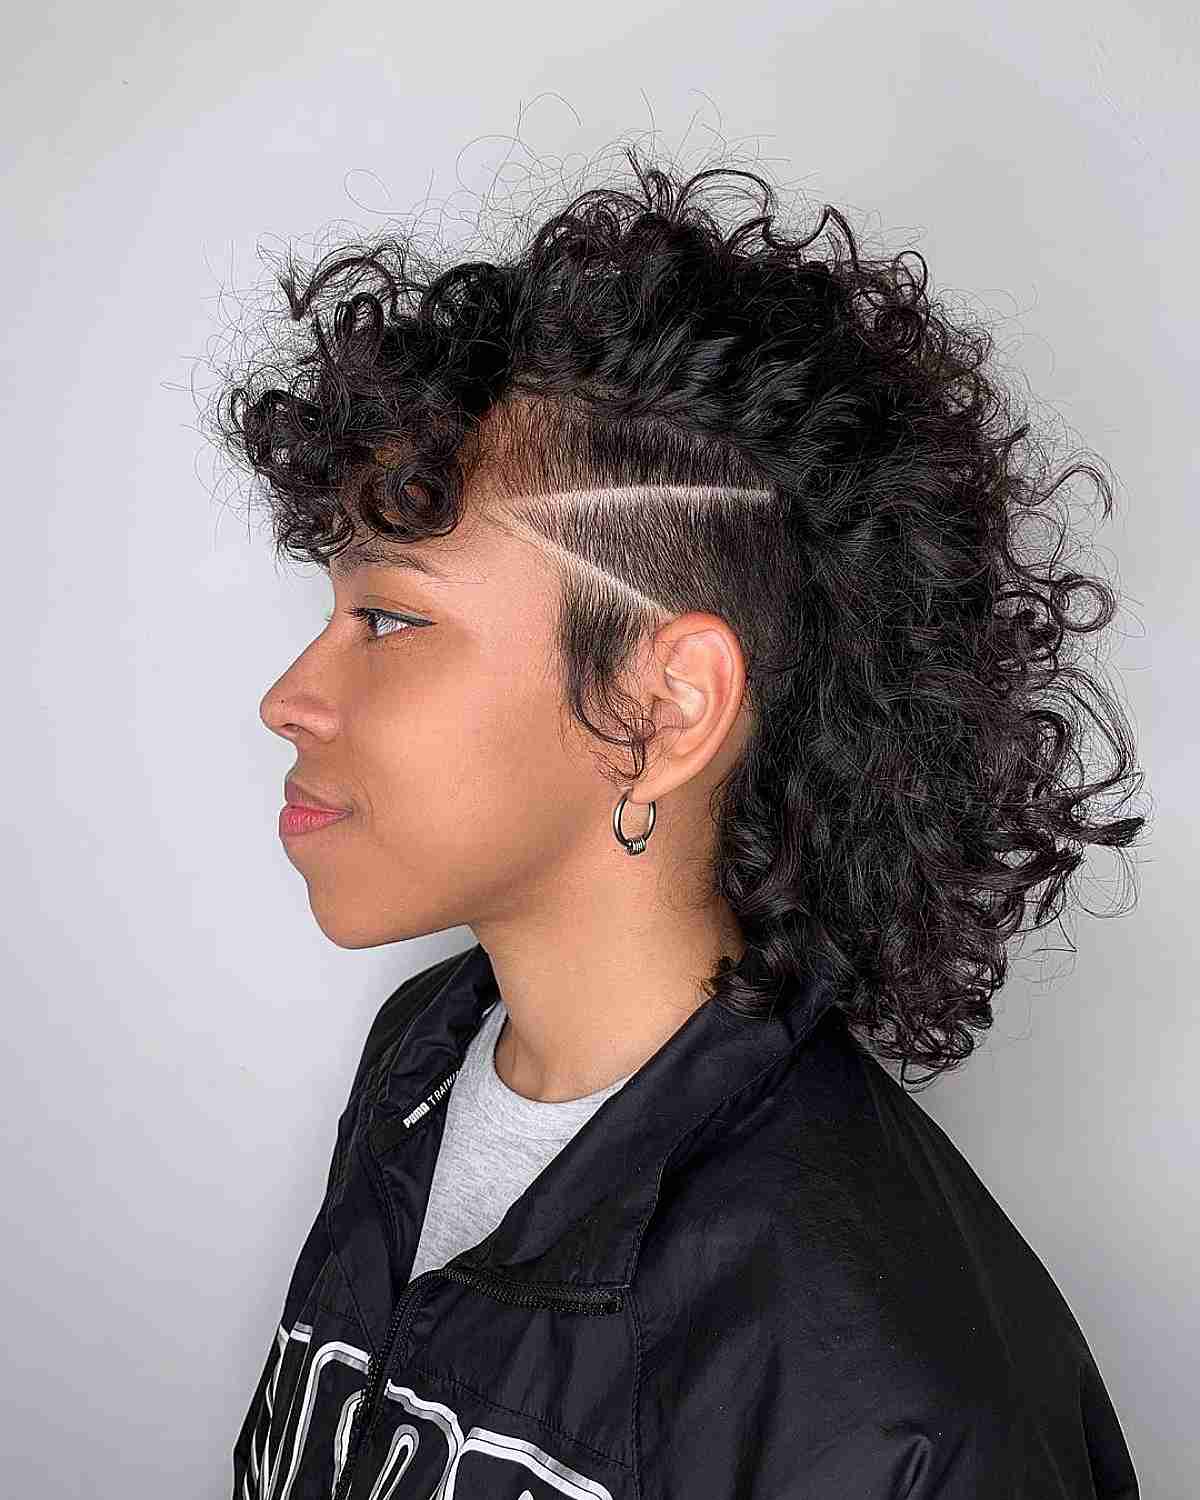 44 Coolest Women's Undercut Hairstyles To Try in 2023